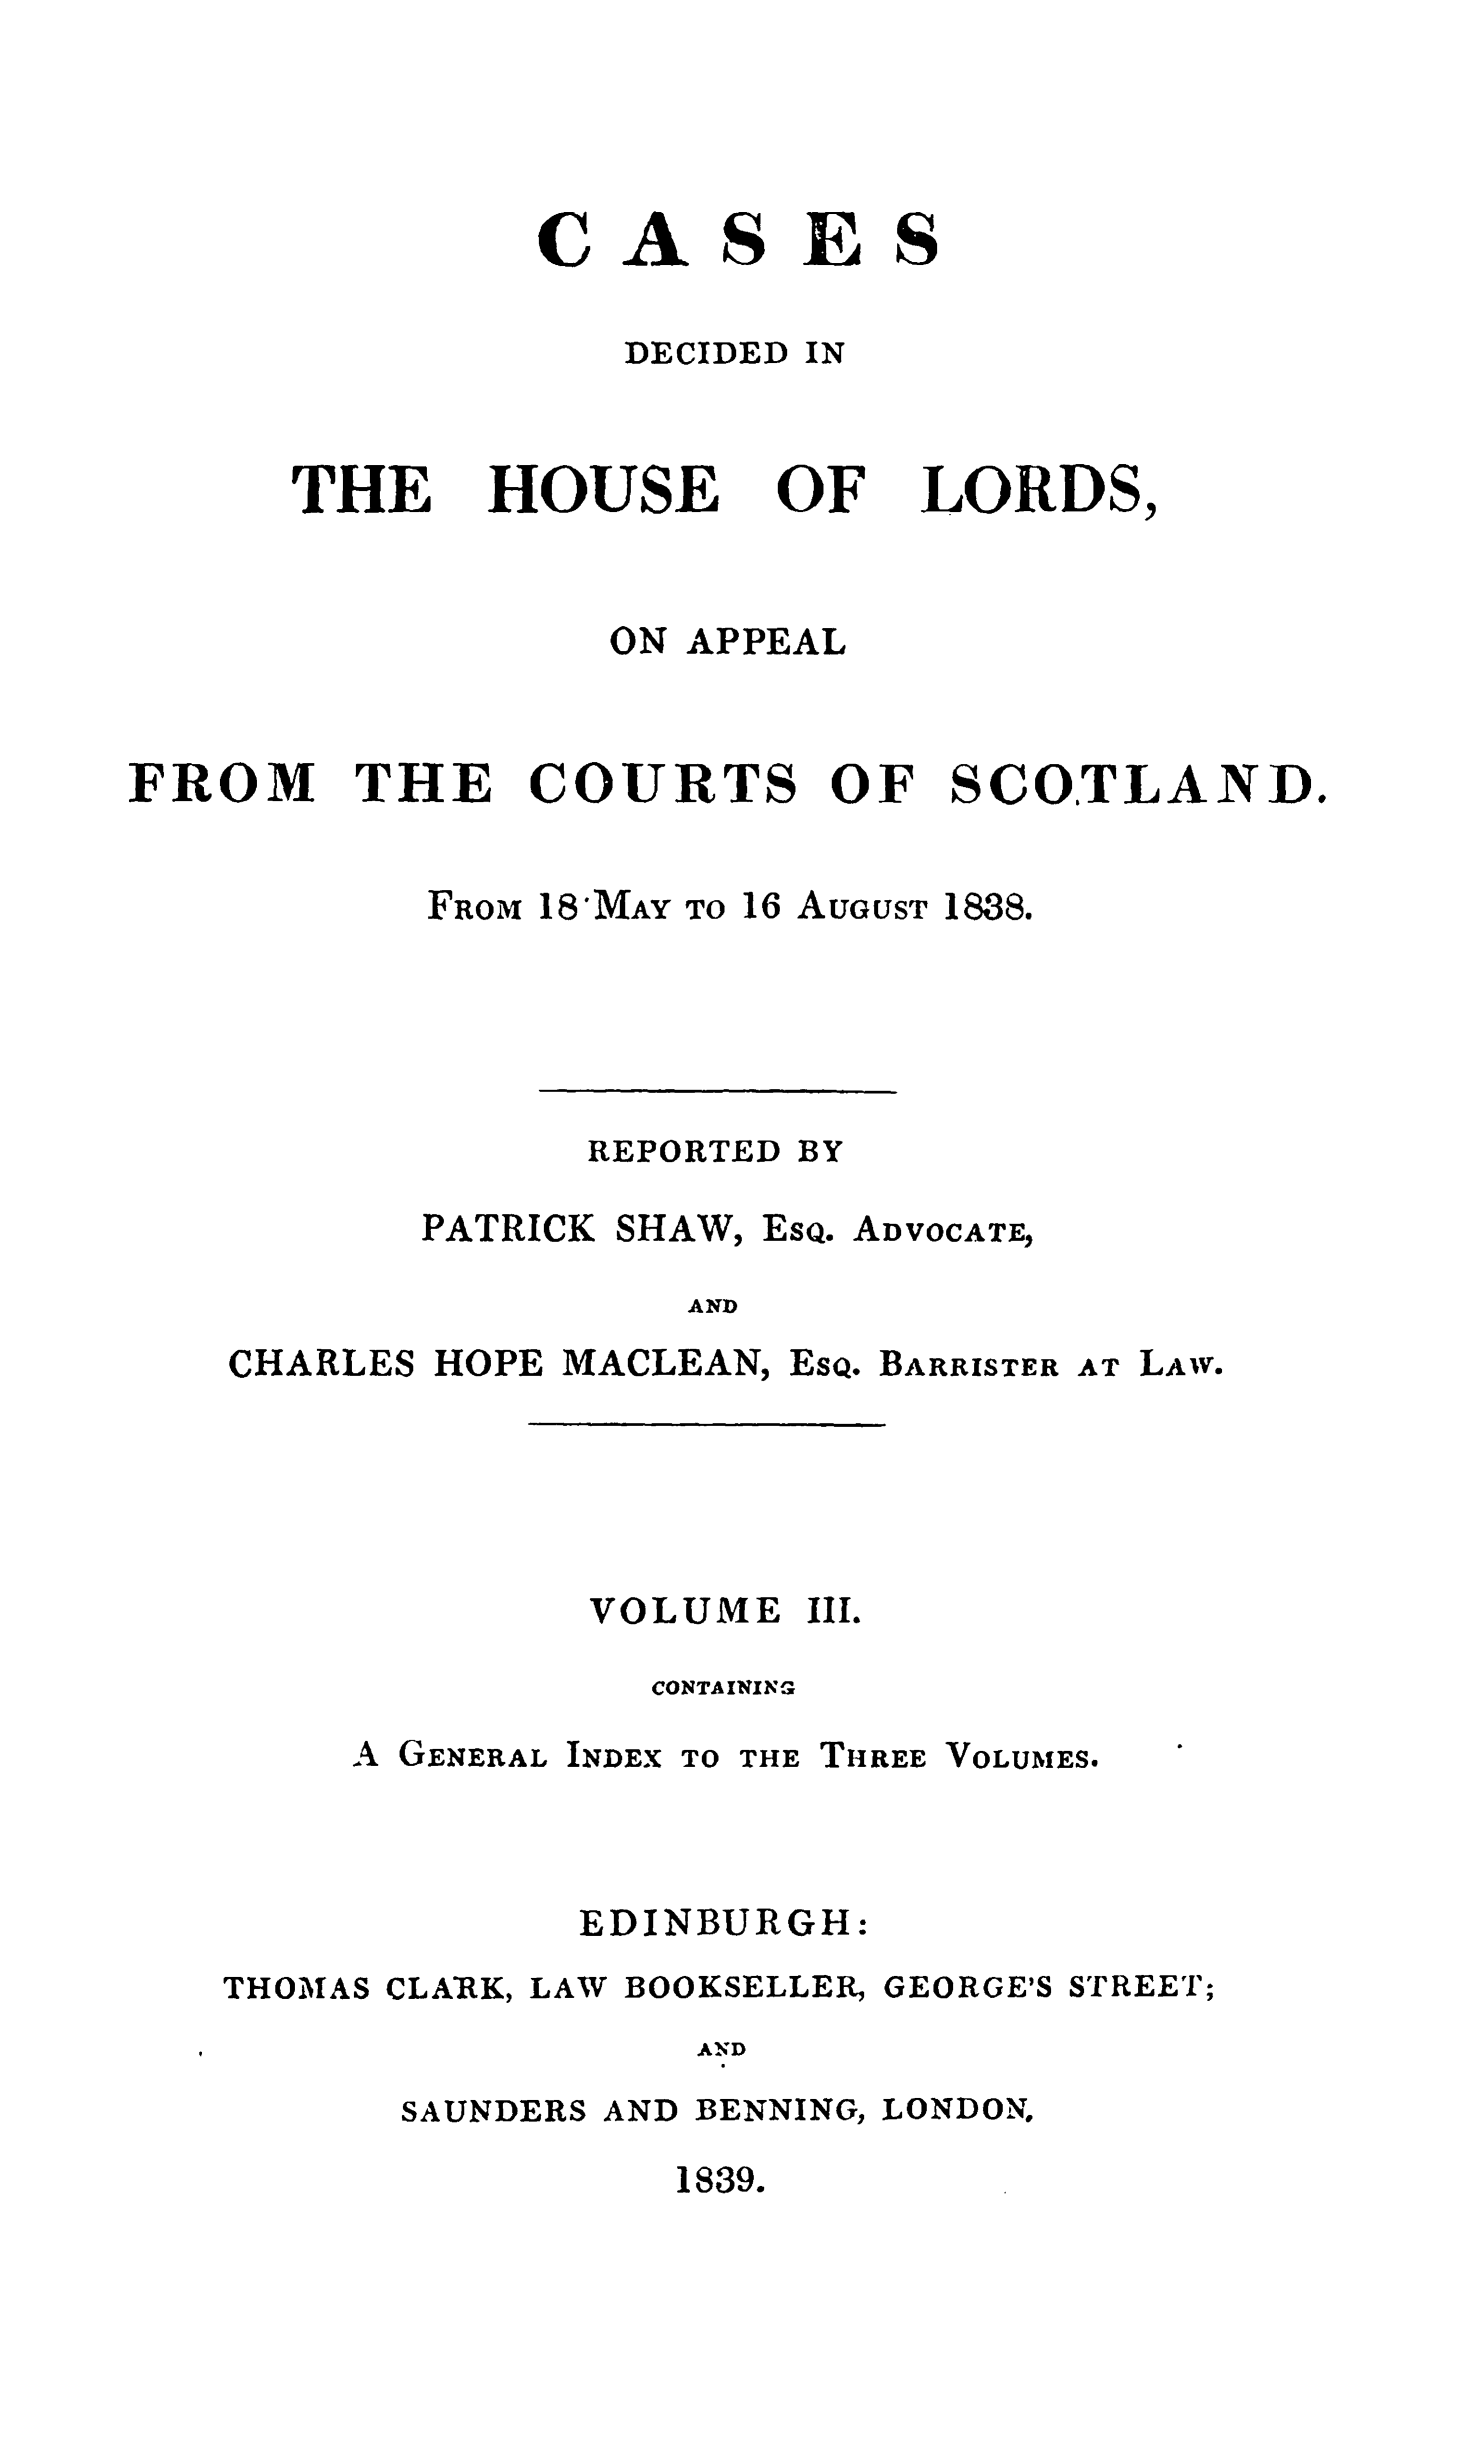 handle is hein.stair/cdeloapcus0003 and id is 1 raw text is: 




CAS

   DECIDED


ES

IN


THE


HOUSE


OF


LORDS,


ON APPEAL


FROM


THE


COURT


S


OF


SCOTLAND.


FROM


18MAY


TO 16 AUGUST


1838


REPORTED


PATRICK


SHAW,


EsQ.


ADVOCATE,


AND


CHARLES HOPE MACLEAN,


EsQ.


BARRISTER


AT LAW.


VOLUME III.

  CONTAINING


A GENERAL


I NDEX


TO THE THREE


VOLUMES.


EDINBURGH:


THOMAS


CLARK,


LAW


BOOKSELLER,


GEORGE'S


STREET;


AND


SAUNDERS


AND


BENNING,


LONDON.


1839.


BY


